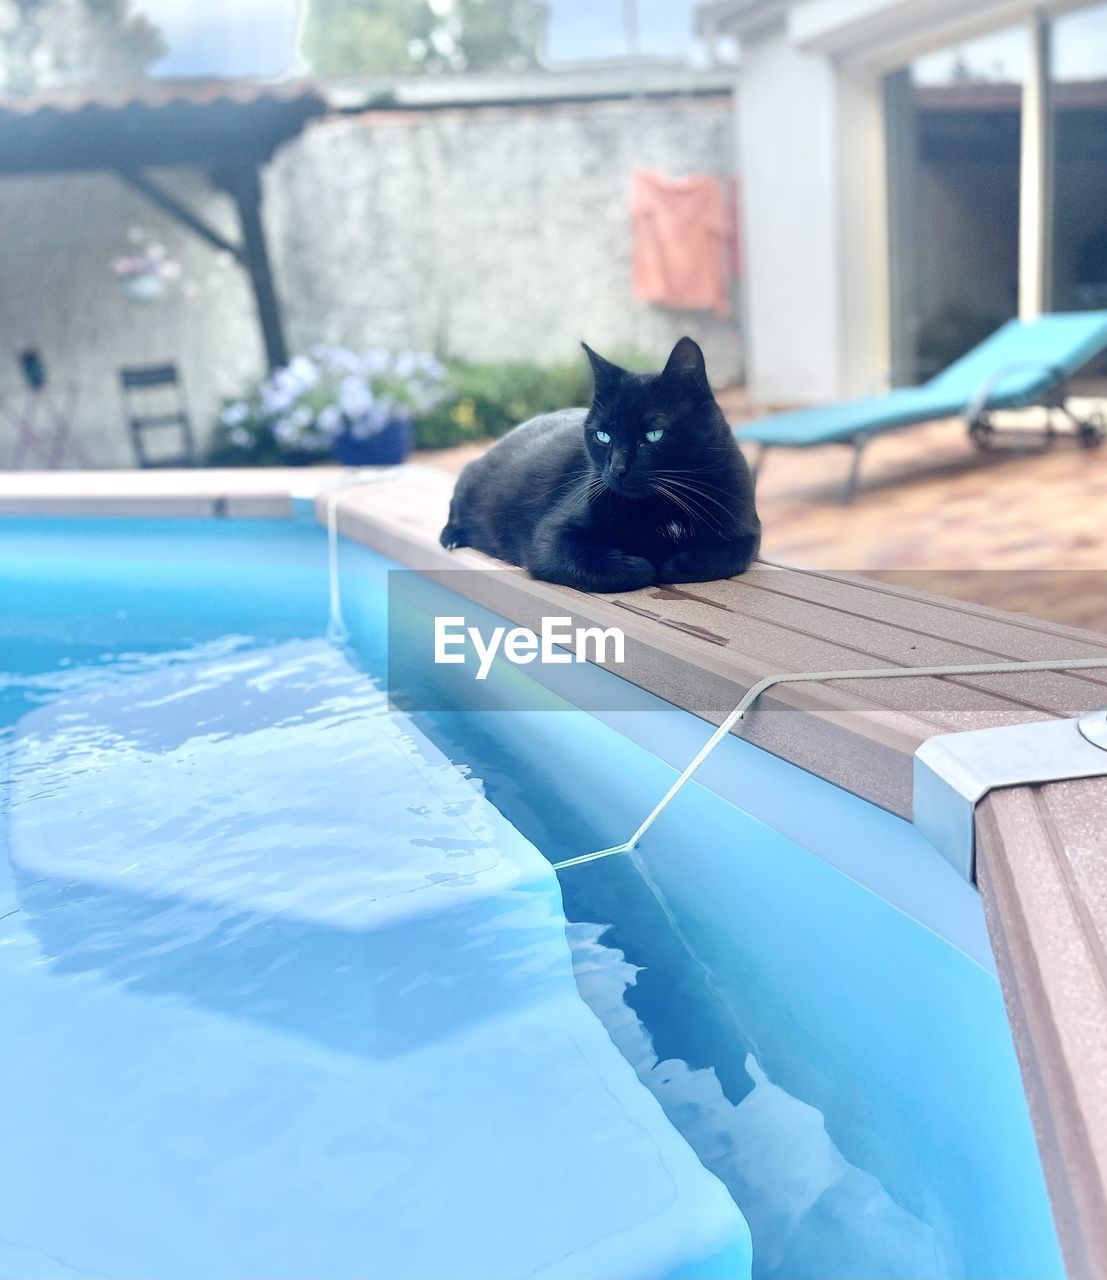 mammal, pet, domestic animals, animal, animal themes, one animal, blue, swimming pool, relaxation, cat, domestic cat, poolside, water, day, feline, nature, no people, architecture, portrait, outdoors, building exterior, canine, dog, window